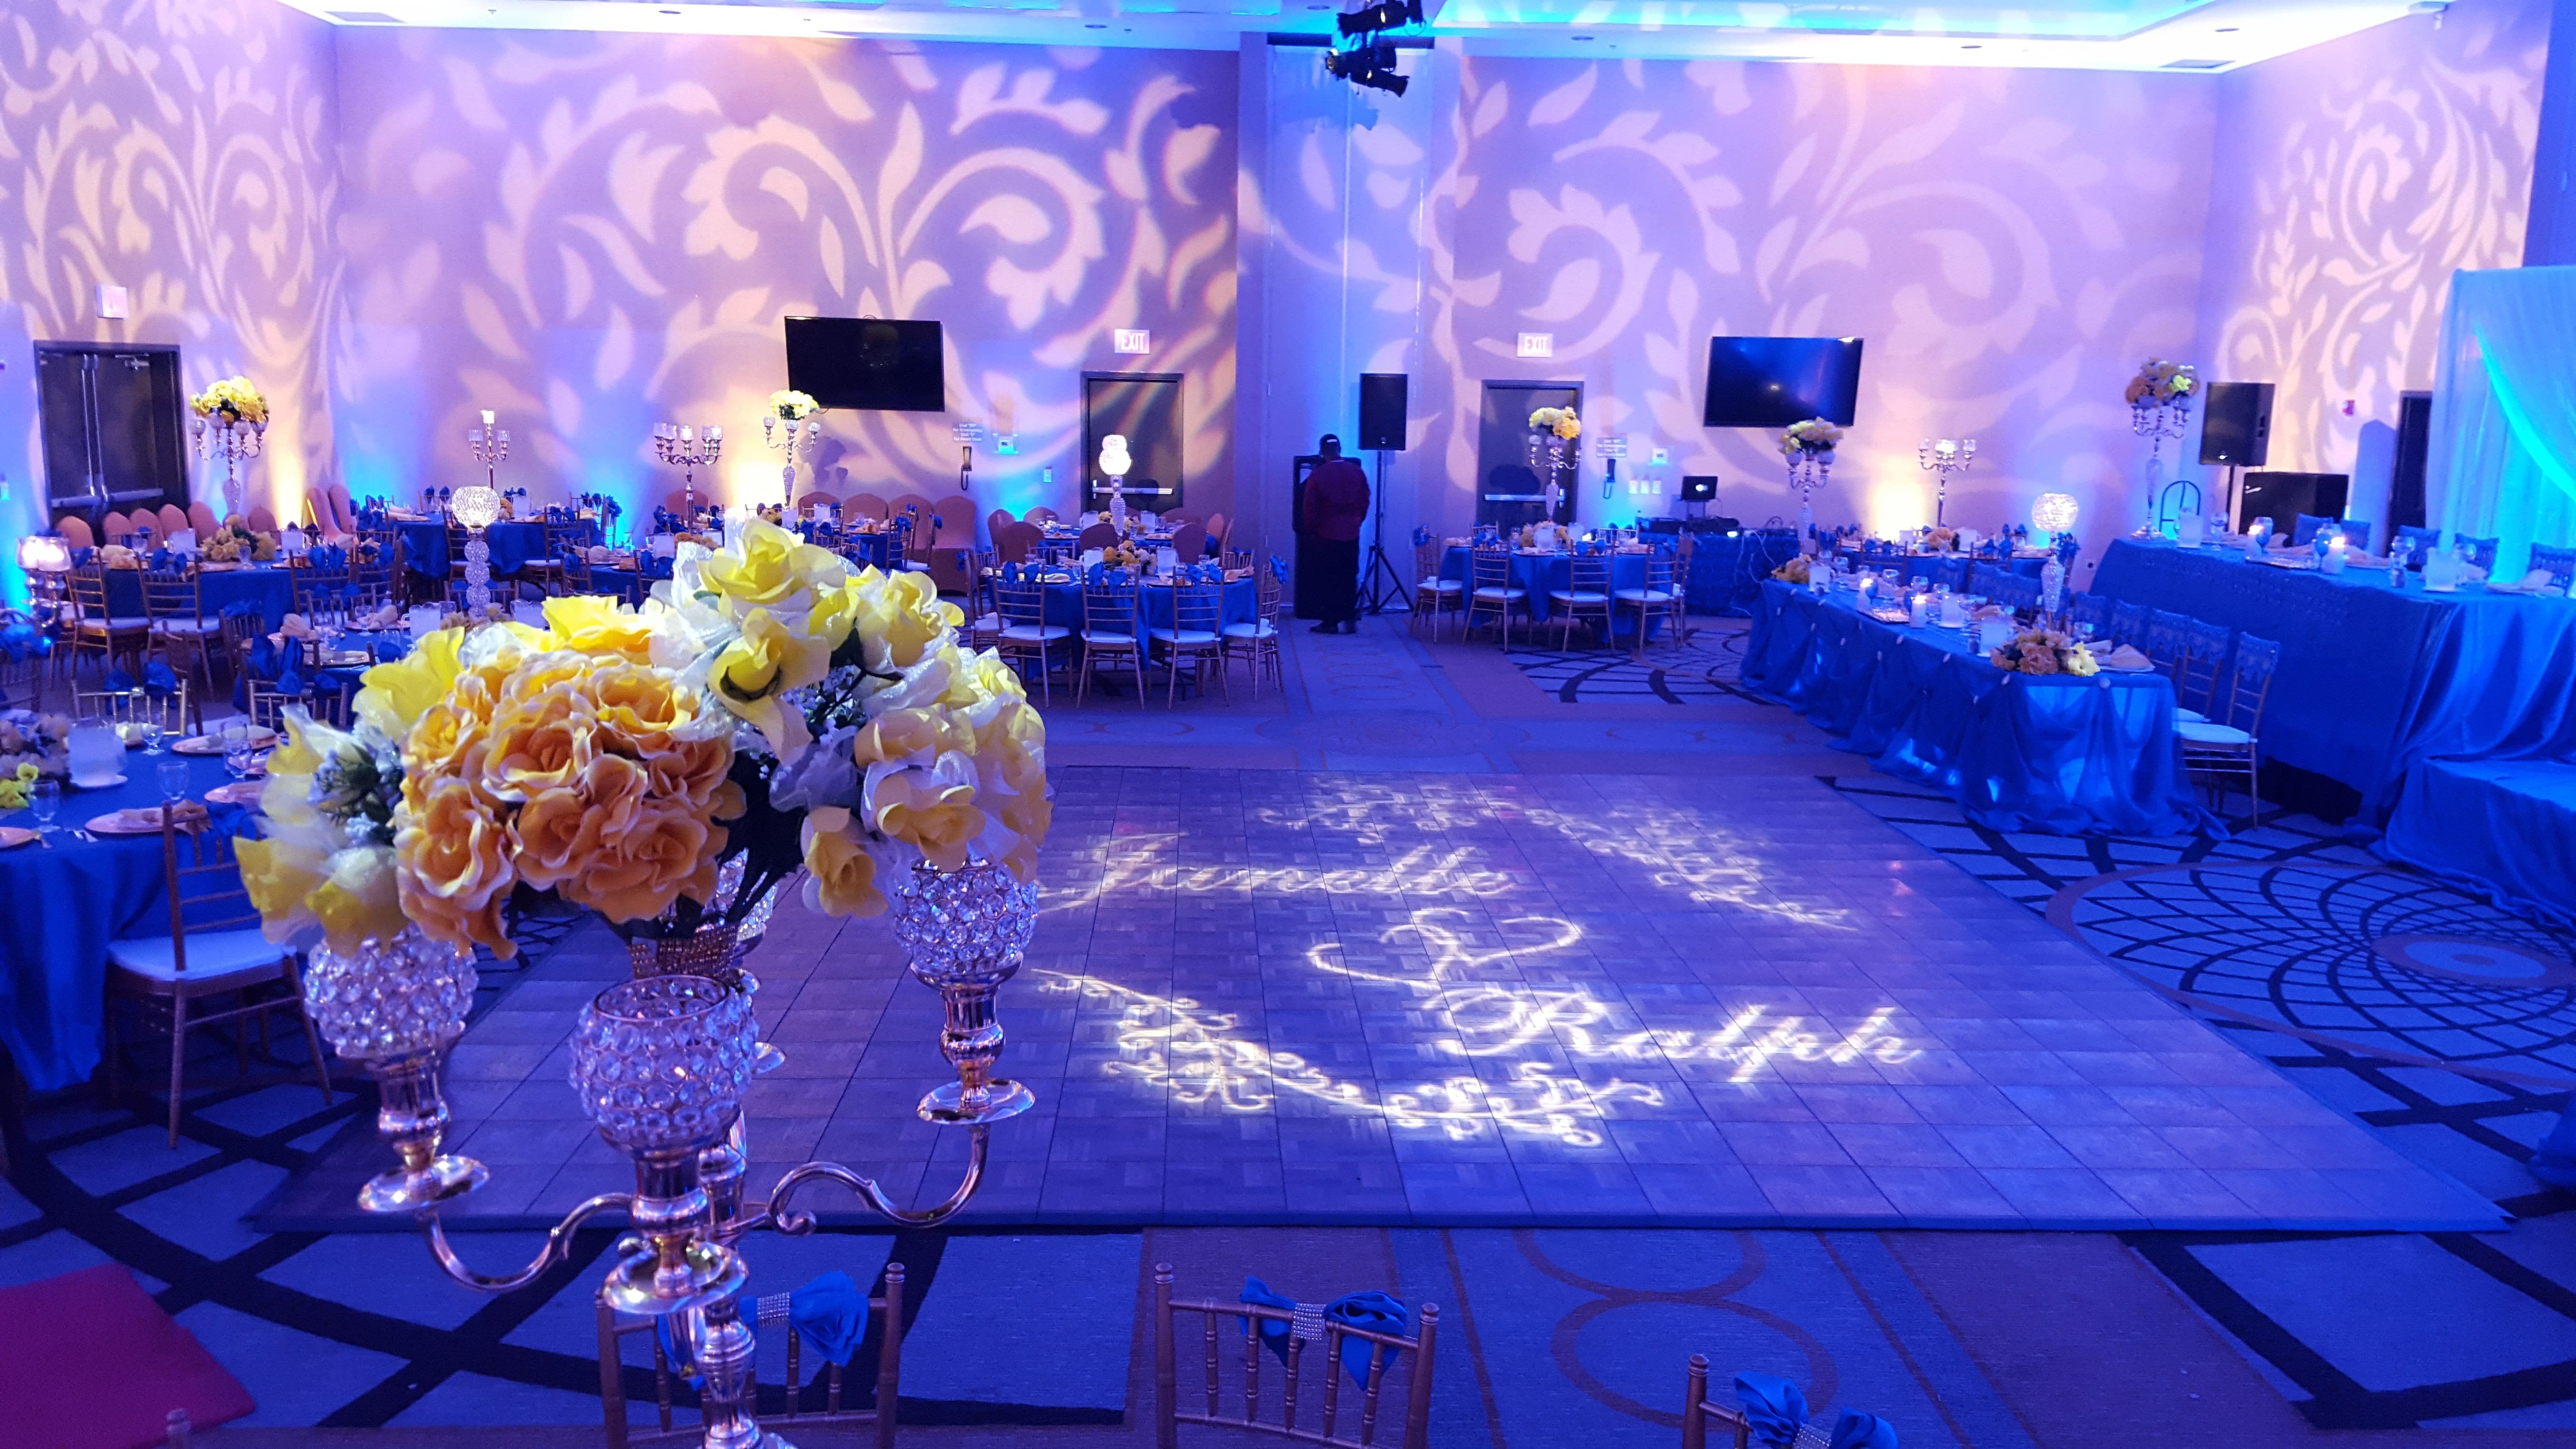 Wedding lighting with gobo patterns projected on the walls.